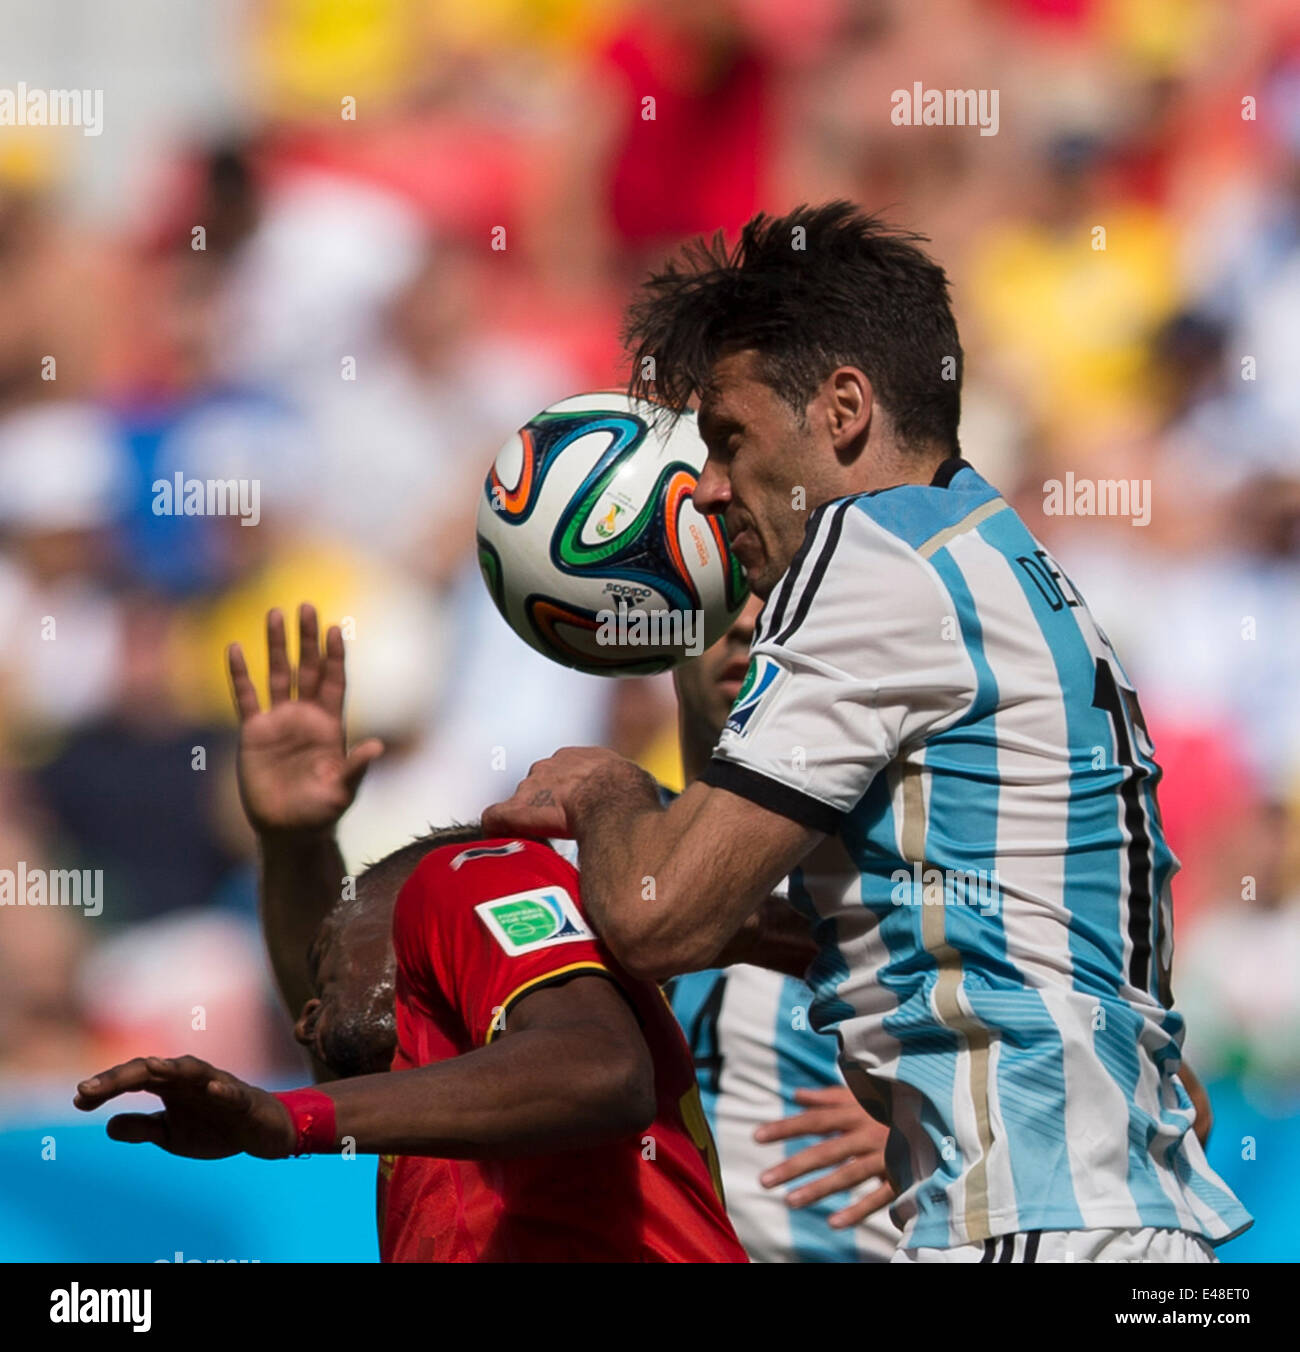 Brasilia, Brazil. 5th July, 2014. Argentina's Martin Demichelis (R) competes for a header during a quarter-finals match between Argentina and Belgium of 2014 FIFA World Cup at the Estadio Nacional Stadium in Brasilia, Brazil, on July 5, 2014. Argentina won 1-0 over Belgium and qualified for the semi-finals. Credit:  Qi Heng/Xinhua/Alamy Live News Stock Photo